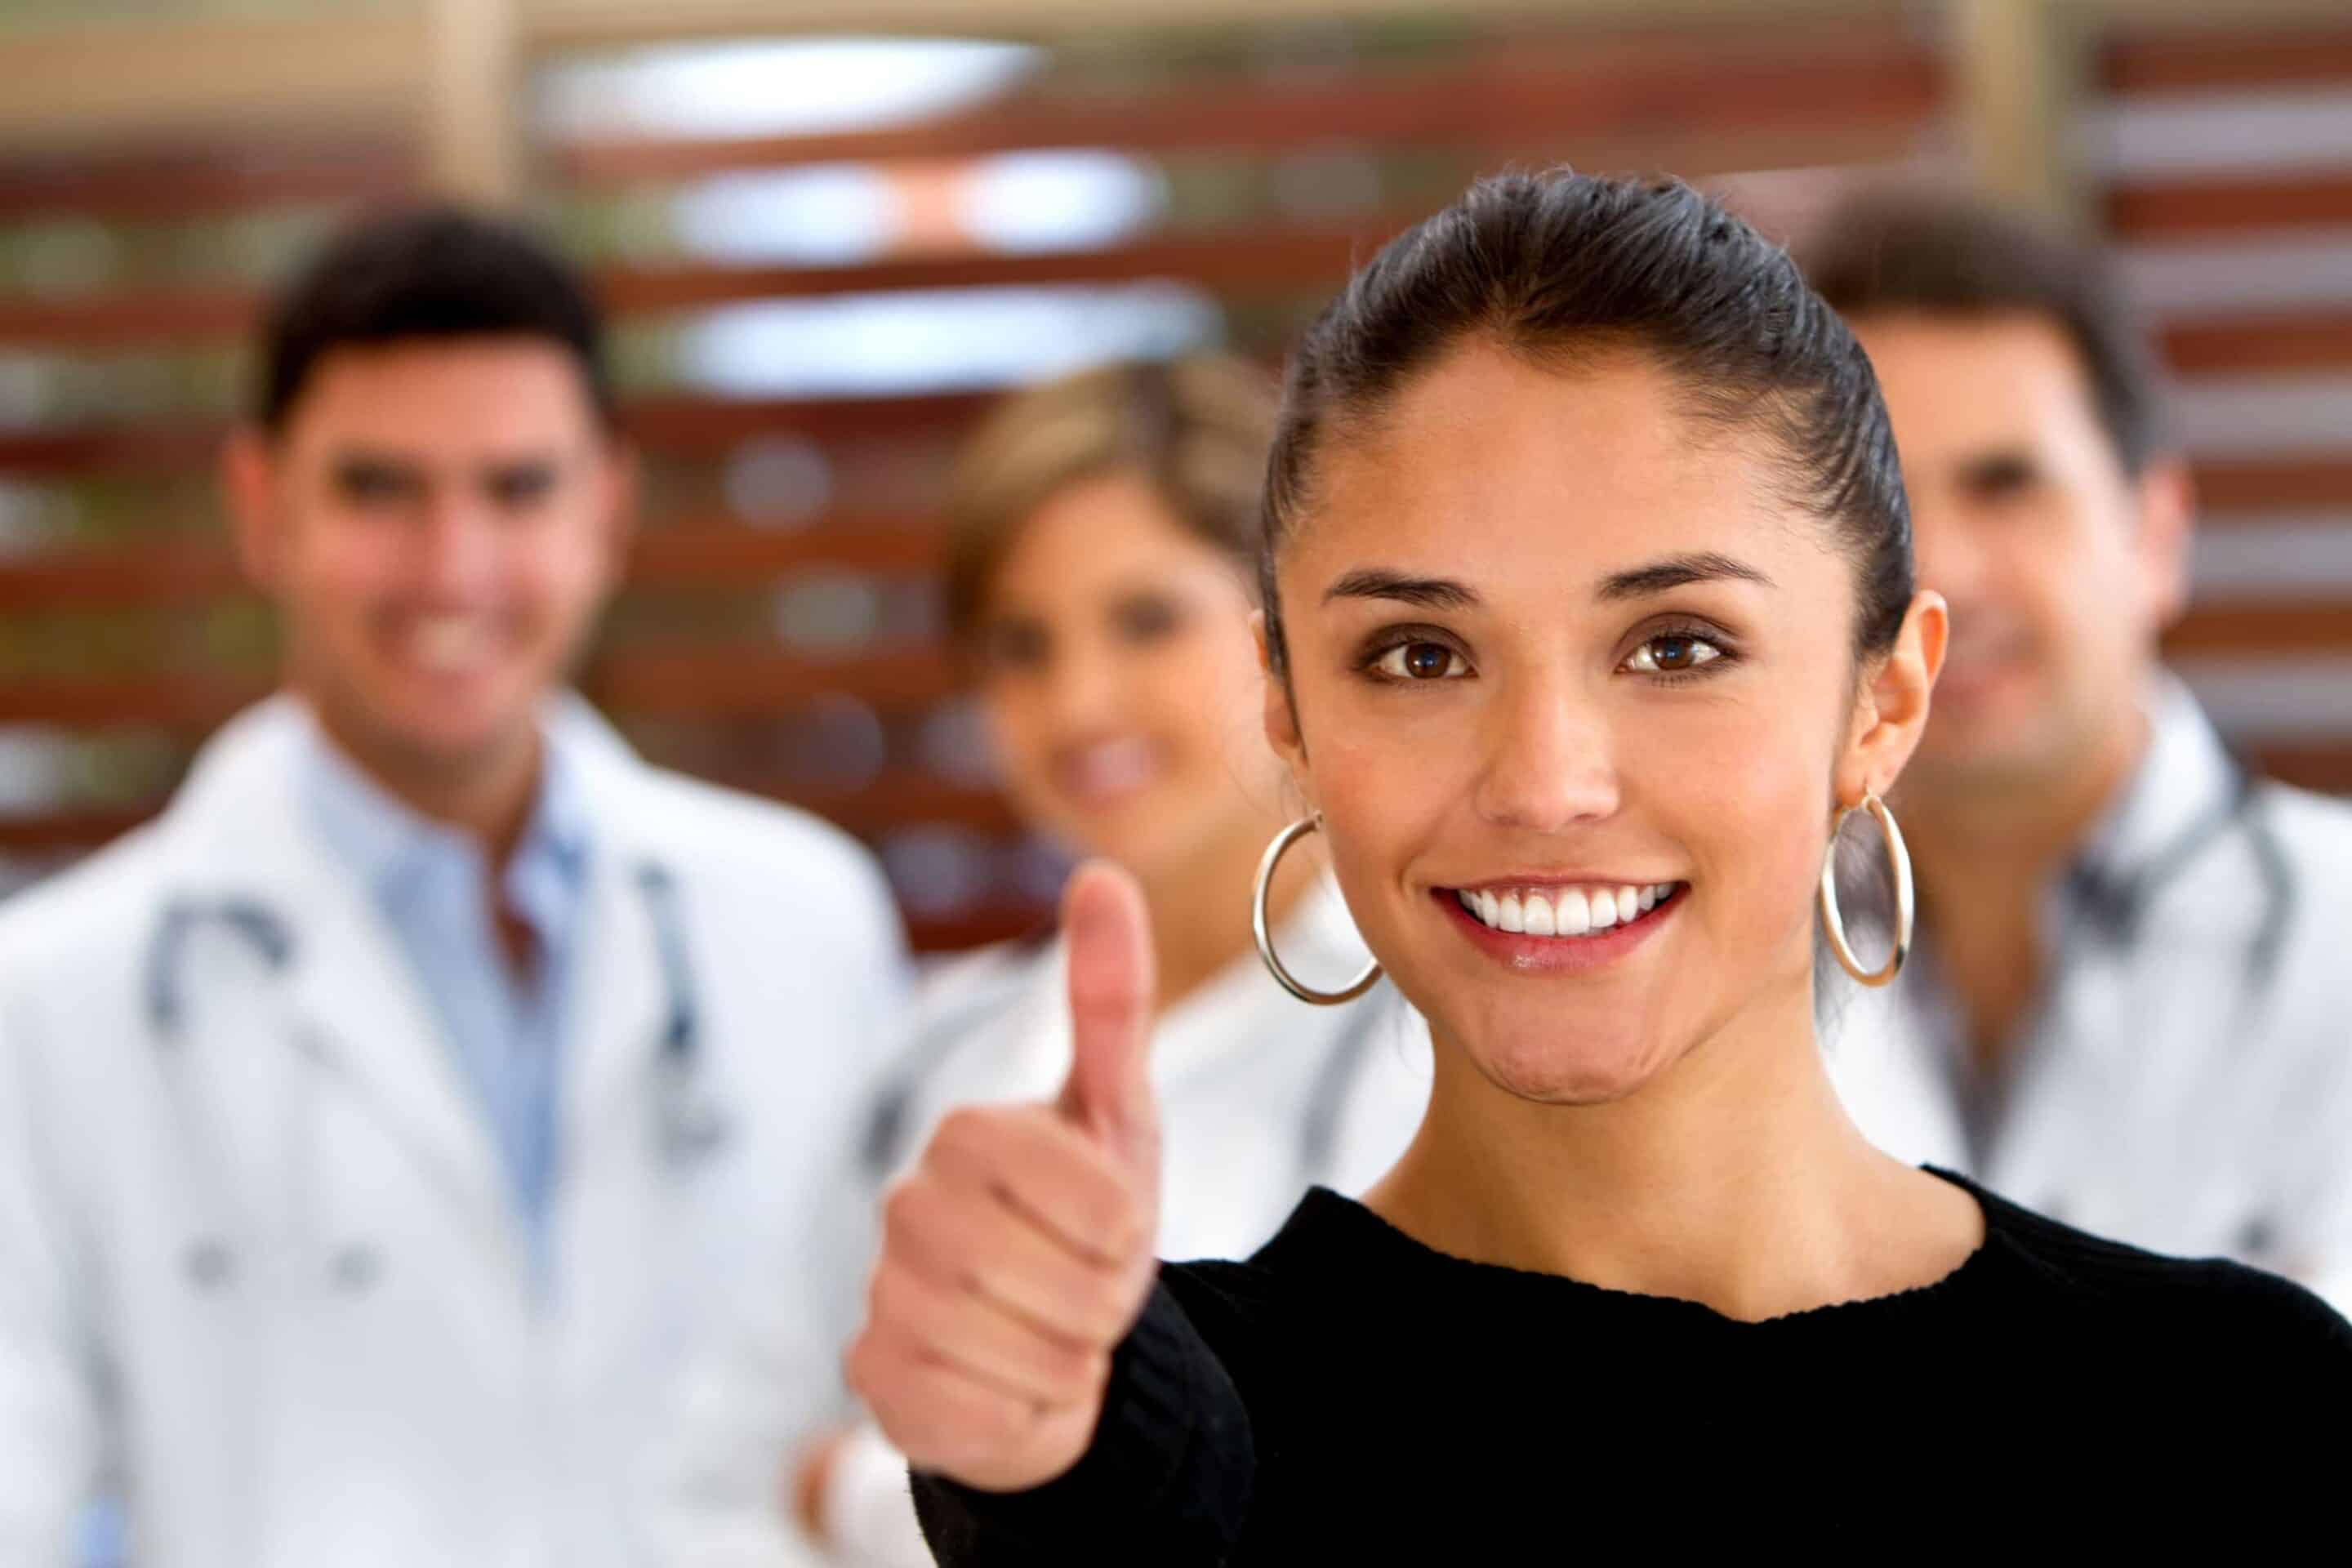 Patient with thumbs up and a group of doctors at the background